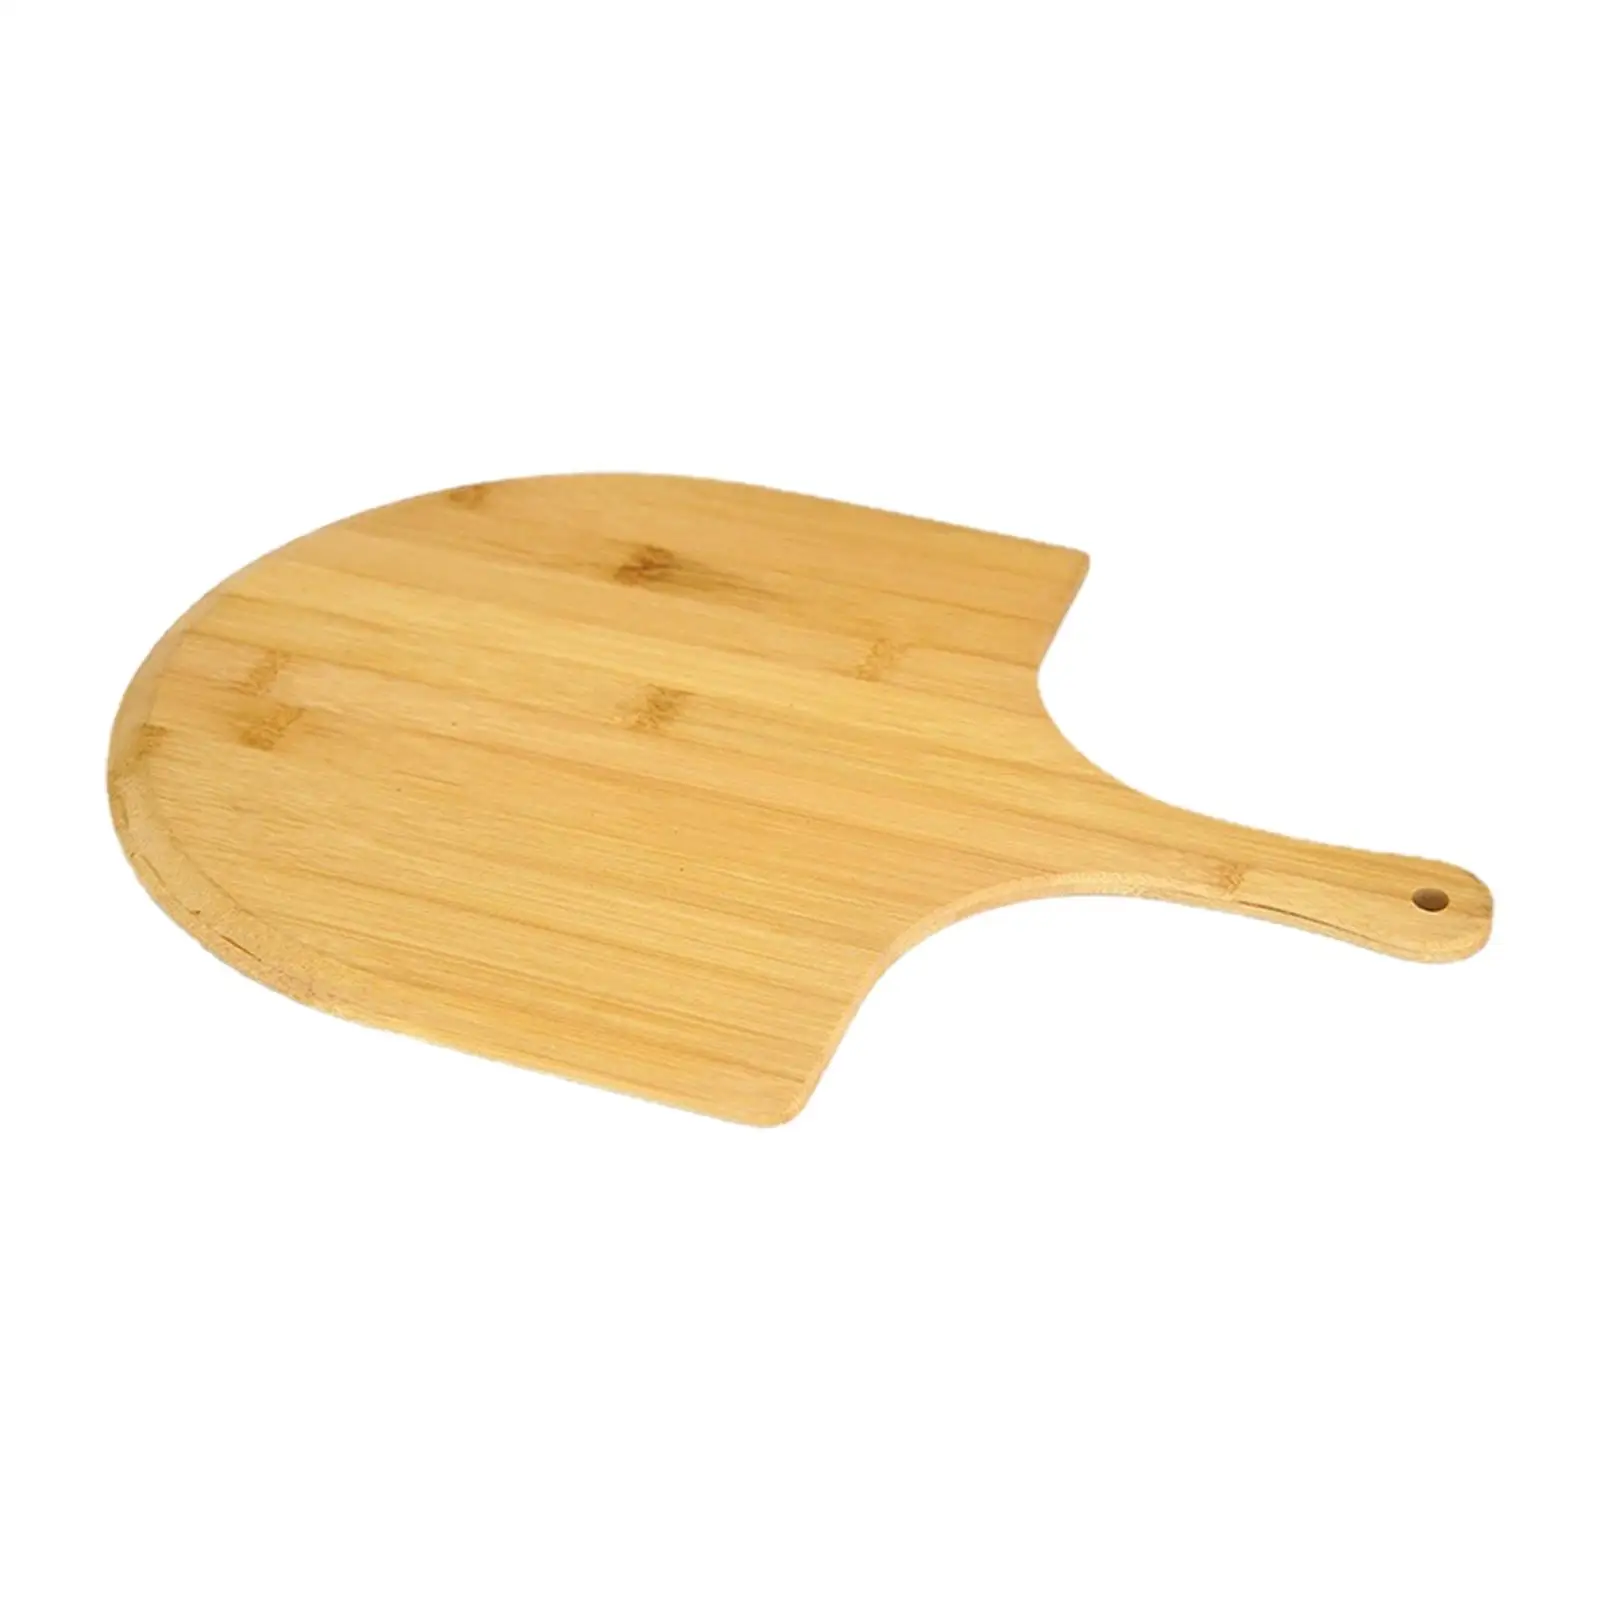 Bamboo Pizza Peel Kitchen Baking Tools Oven Kitchen Accessories with Ergonomic Handle Wooden Pizza Board for Vegetables Baking